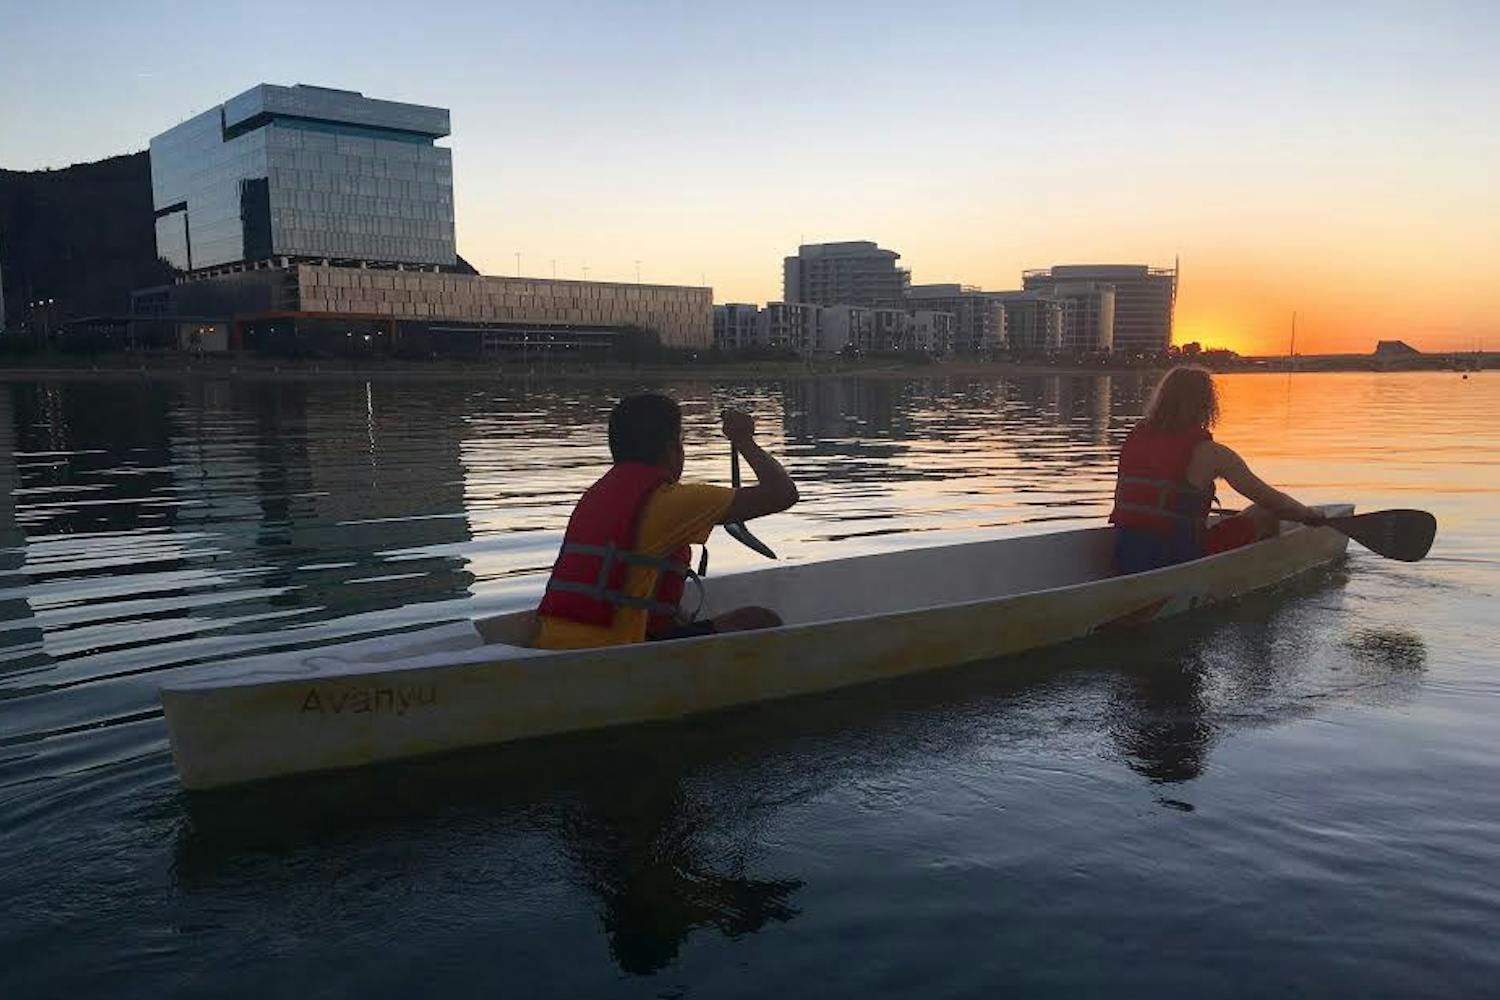 Sophomore civil engineering major Connor Fegard and his teammate row down Tempe Town Lake on Friday, Oct. 21, 2016.